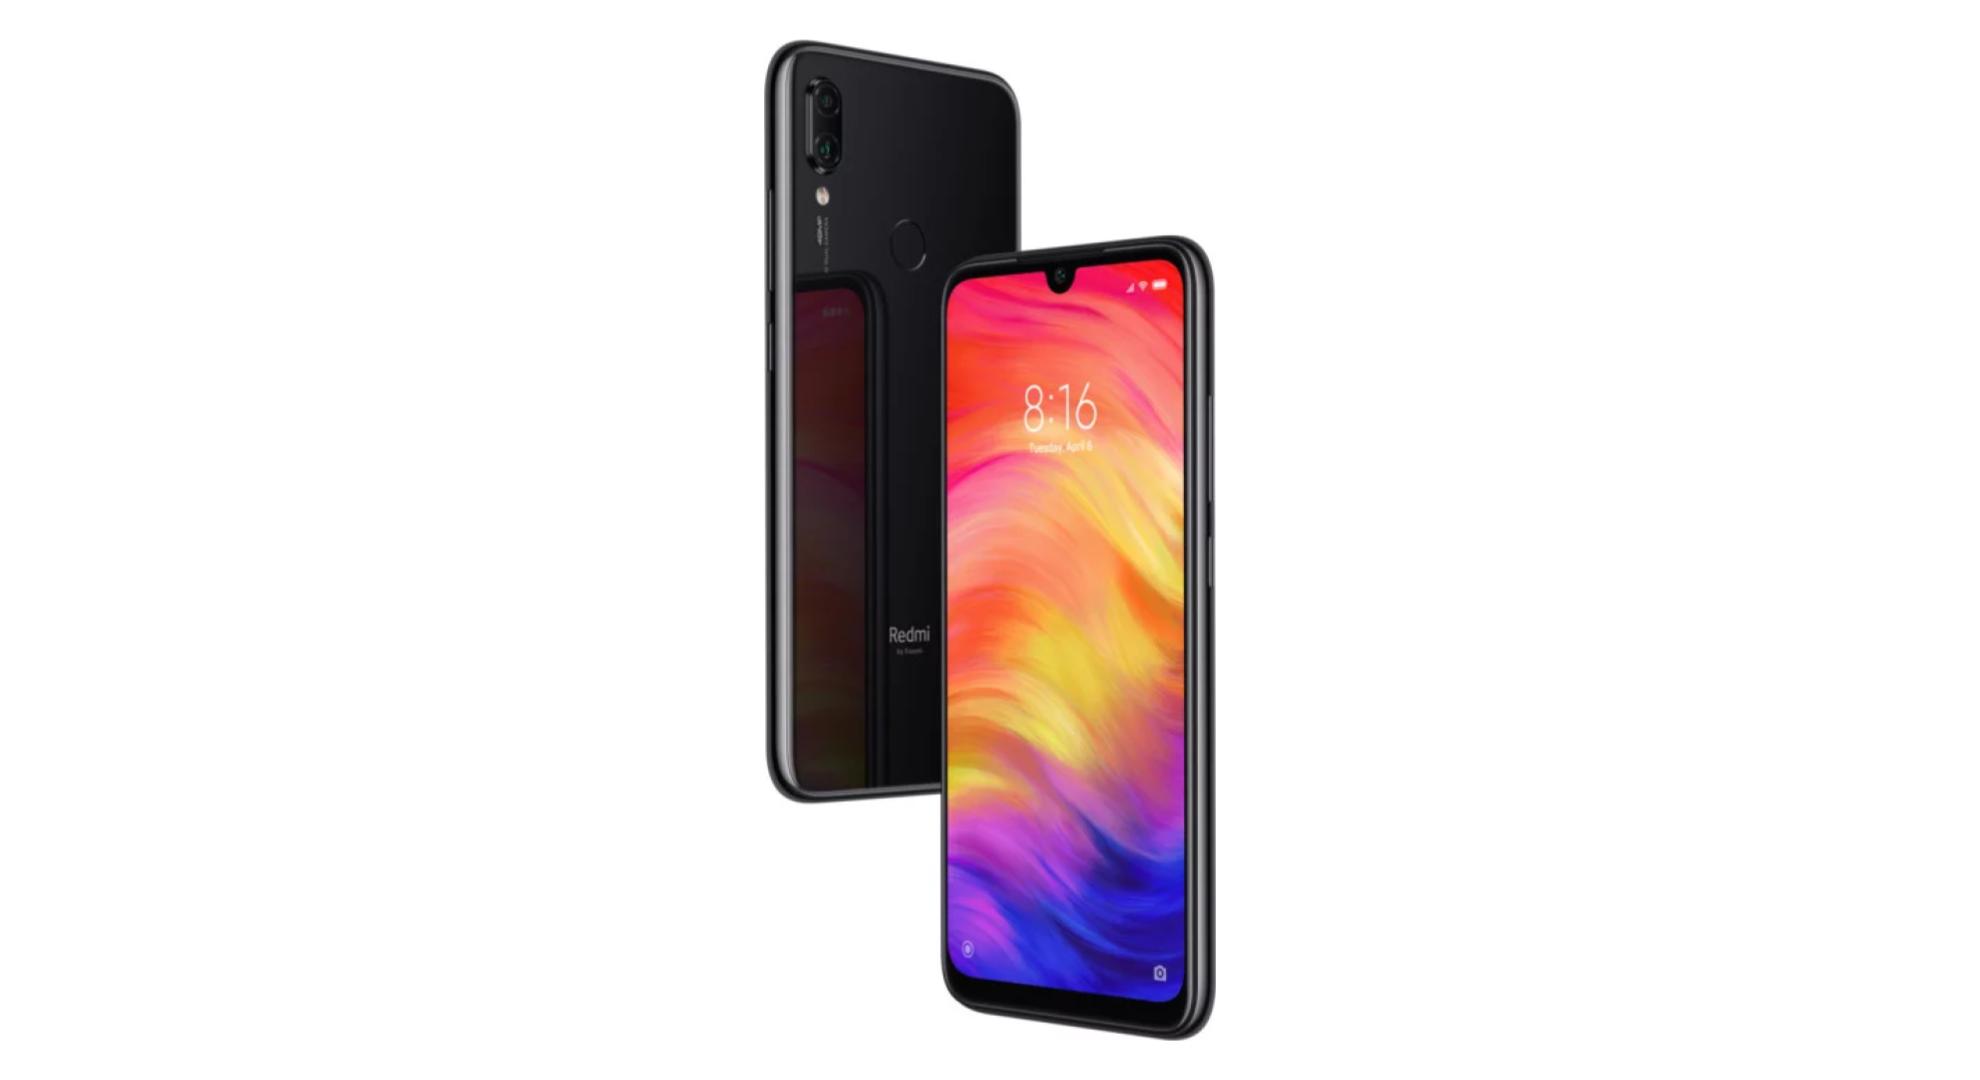 Xiaomi Redmi Note 7 4/64gb. Redmi Note 7 64gb. Redmi 7 64gb. Redmi Note 7 1901f7g.